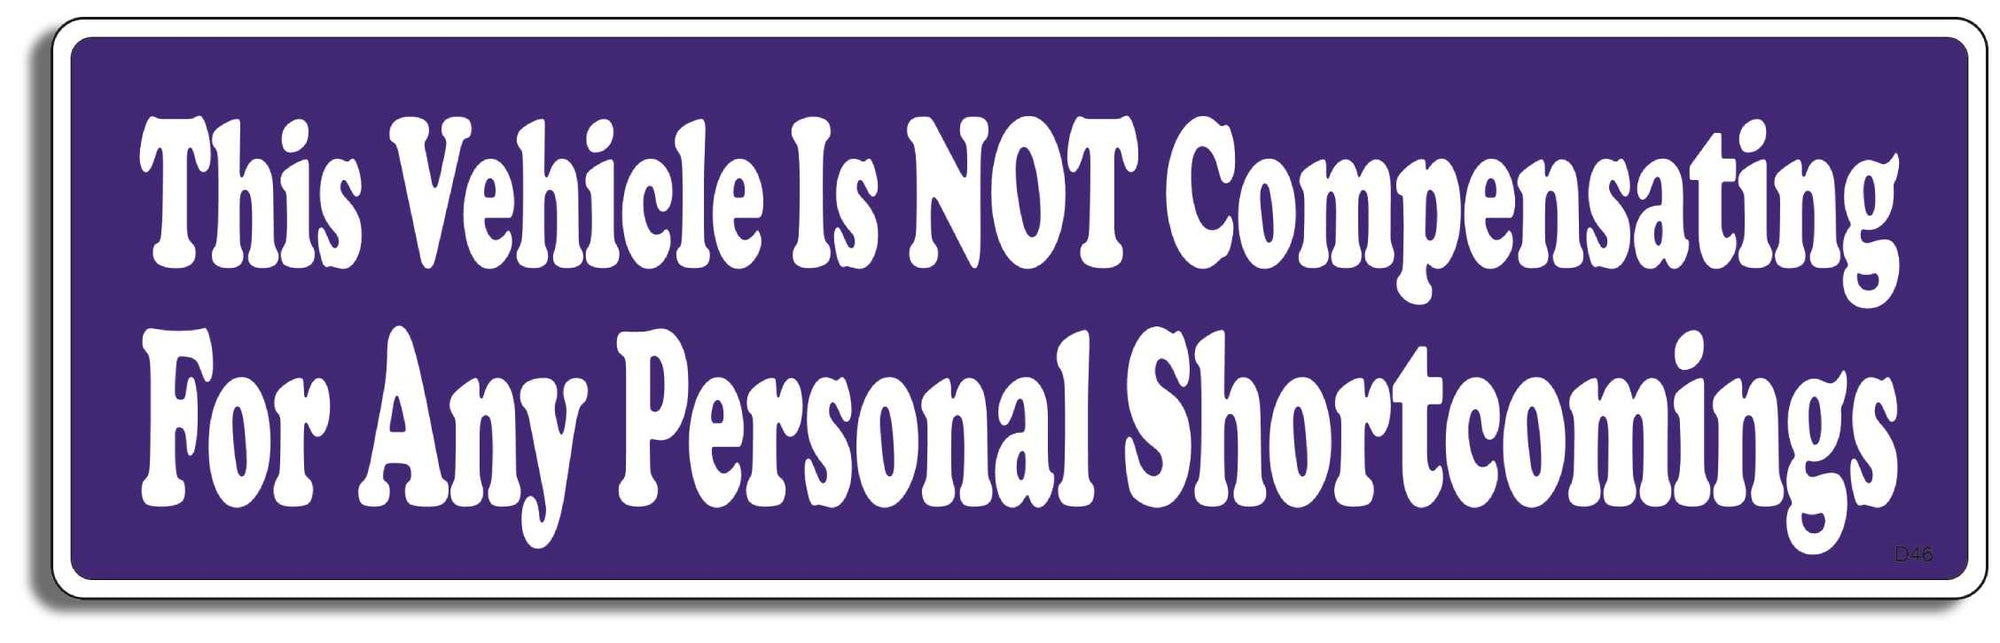 This Vehicle Is Not Compensating For Any Personal Shortcomings -  3" x 10" Bumper Sticker--Car Magnet- -  Decal Bumper Sticker-funny Bumper Sticker Car Magnet This Vehicle Is Not Compensating-  Decal for carsDriving, Funny, funny bumper sticker, funny quote, funny quotes